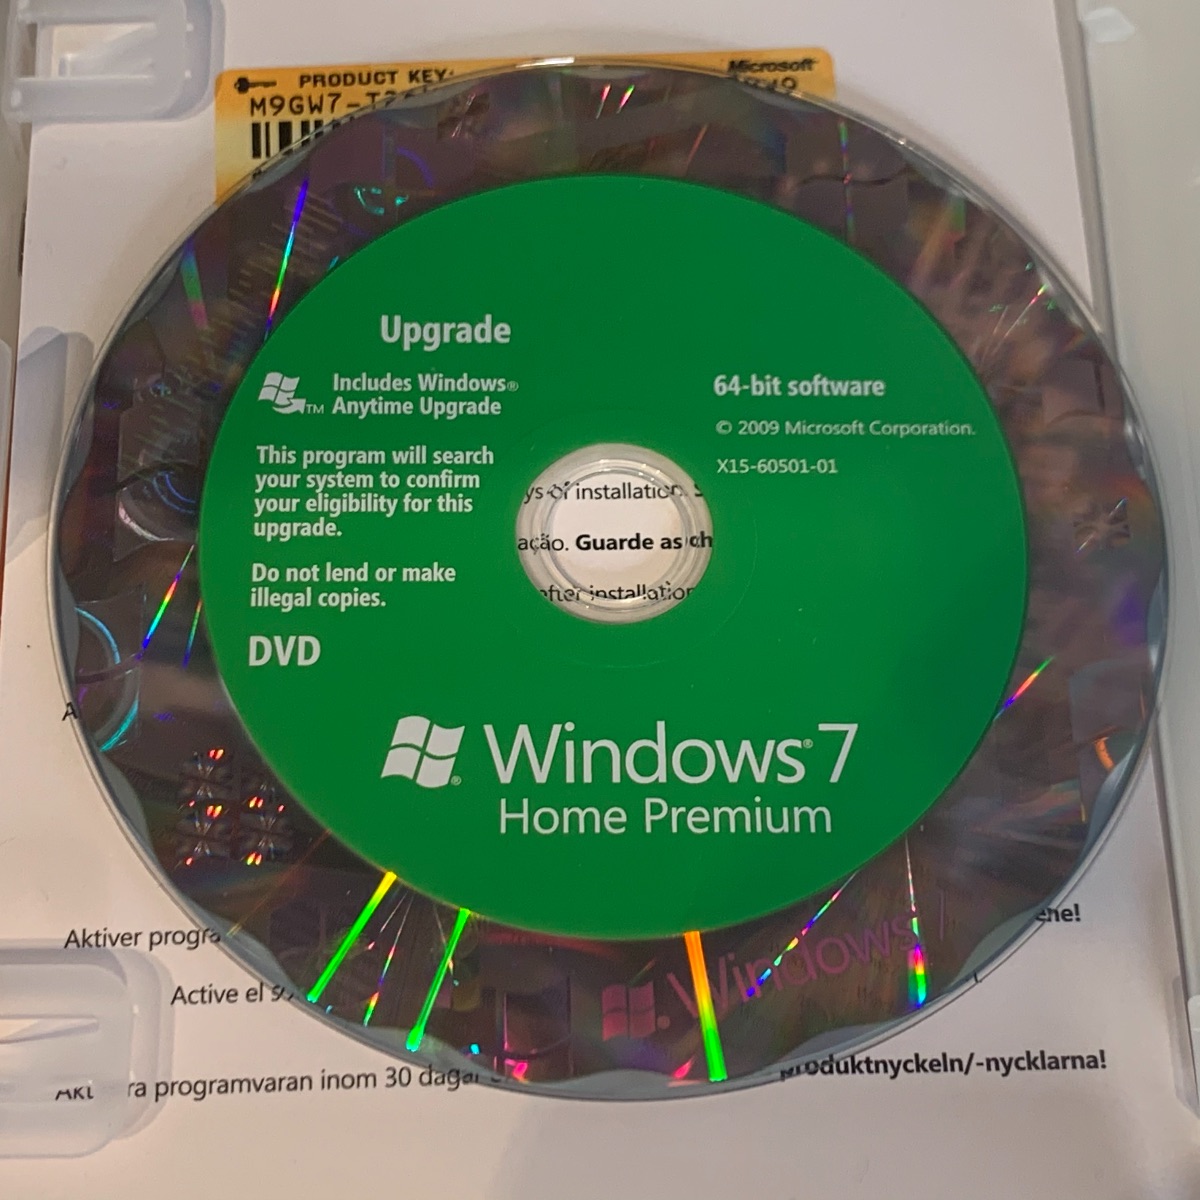 Windows 7 Home Premium Upgrade DVD 64-Bit Product License Key Original Boxed GFC-00026 882224883511 (Previously Used)